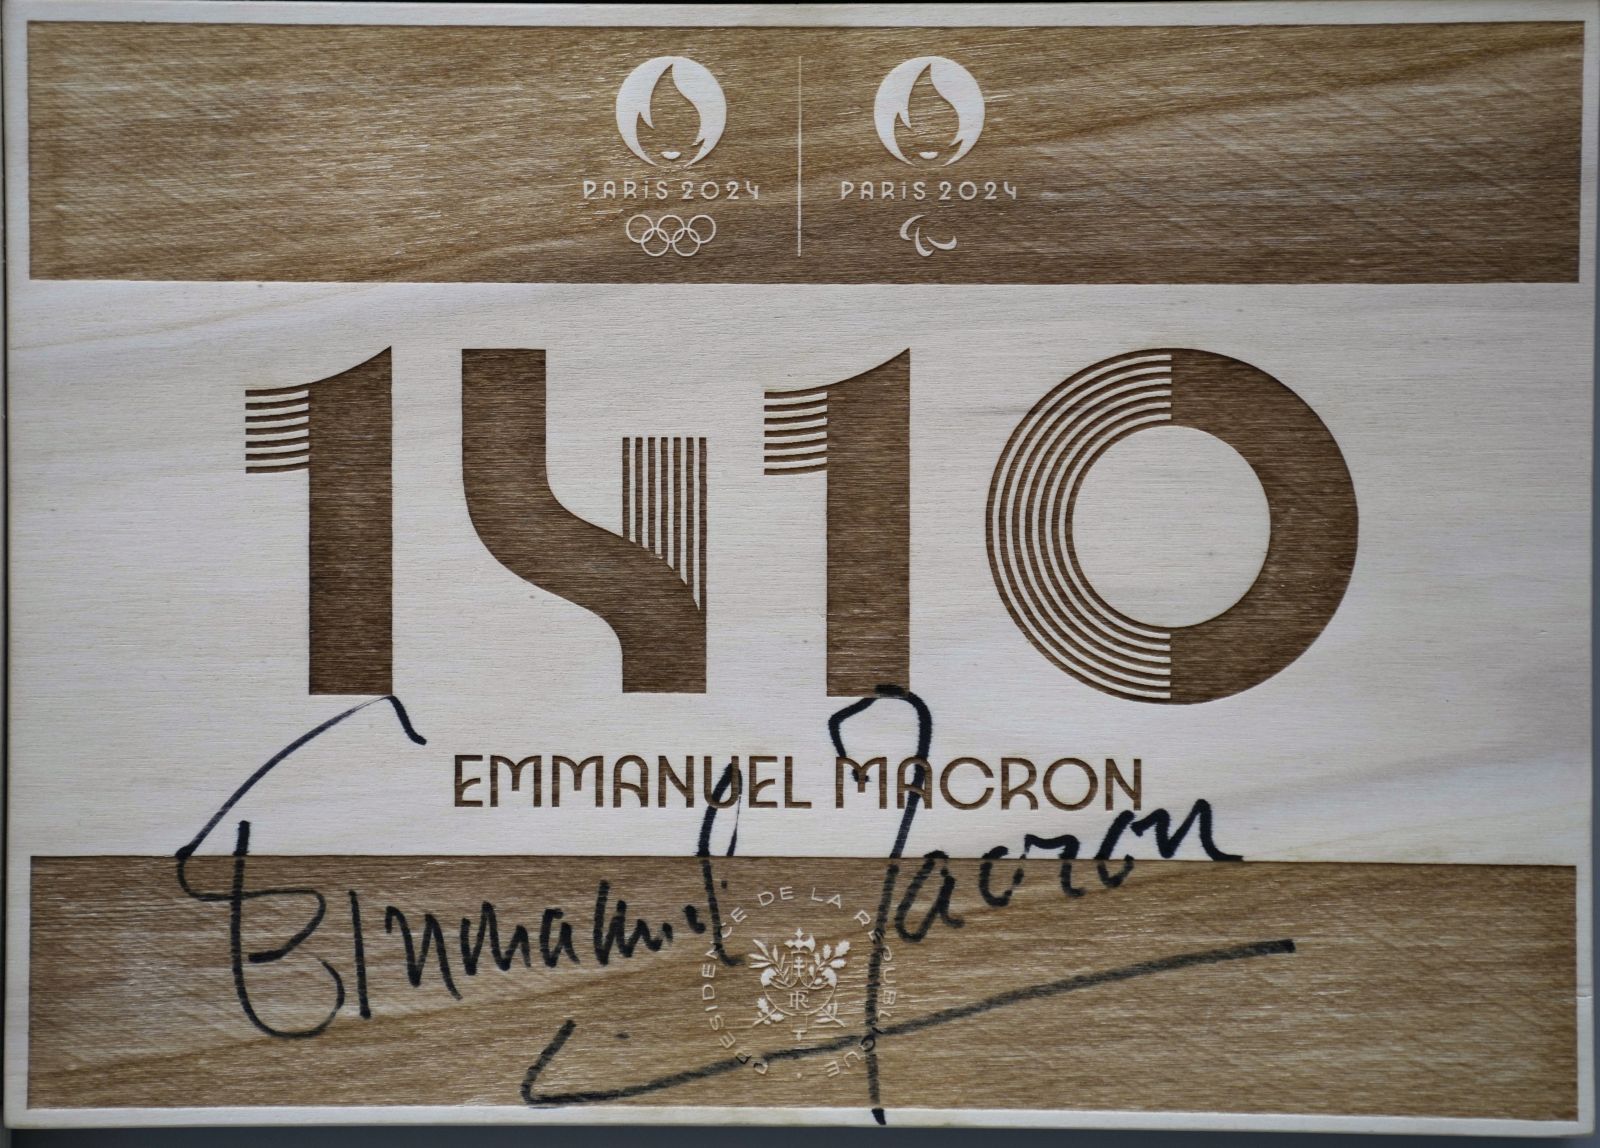 epa09523686 French President Emmanuel Macron signed a plaque to mark his visit at the headquarters of the Paris 2024 Organizing Committee, in Saint Denis, outside Paris, France, 14 October 2021. Macron will promote sports ahead of the 2024 Olympic Games in Paris.  EPA/FRANCOIS MORI / POOL MAXPPP OUT